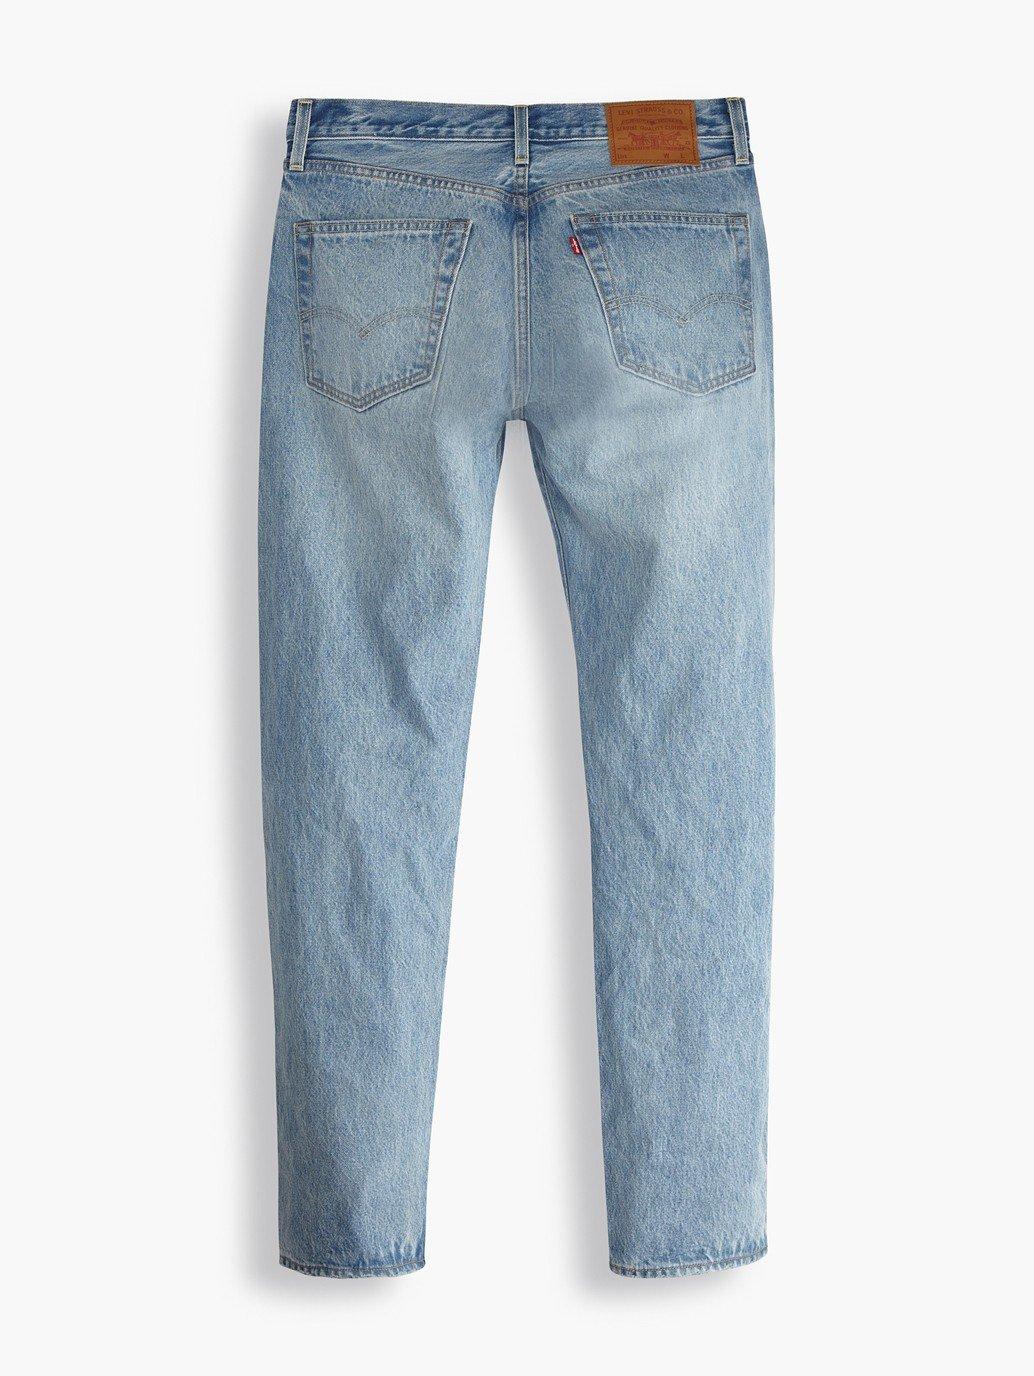 levis malaysia mens 501 54 jeans A46770006 15 Details